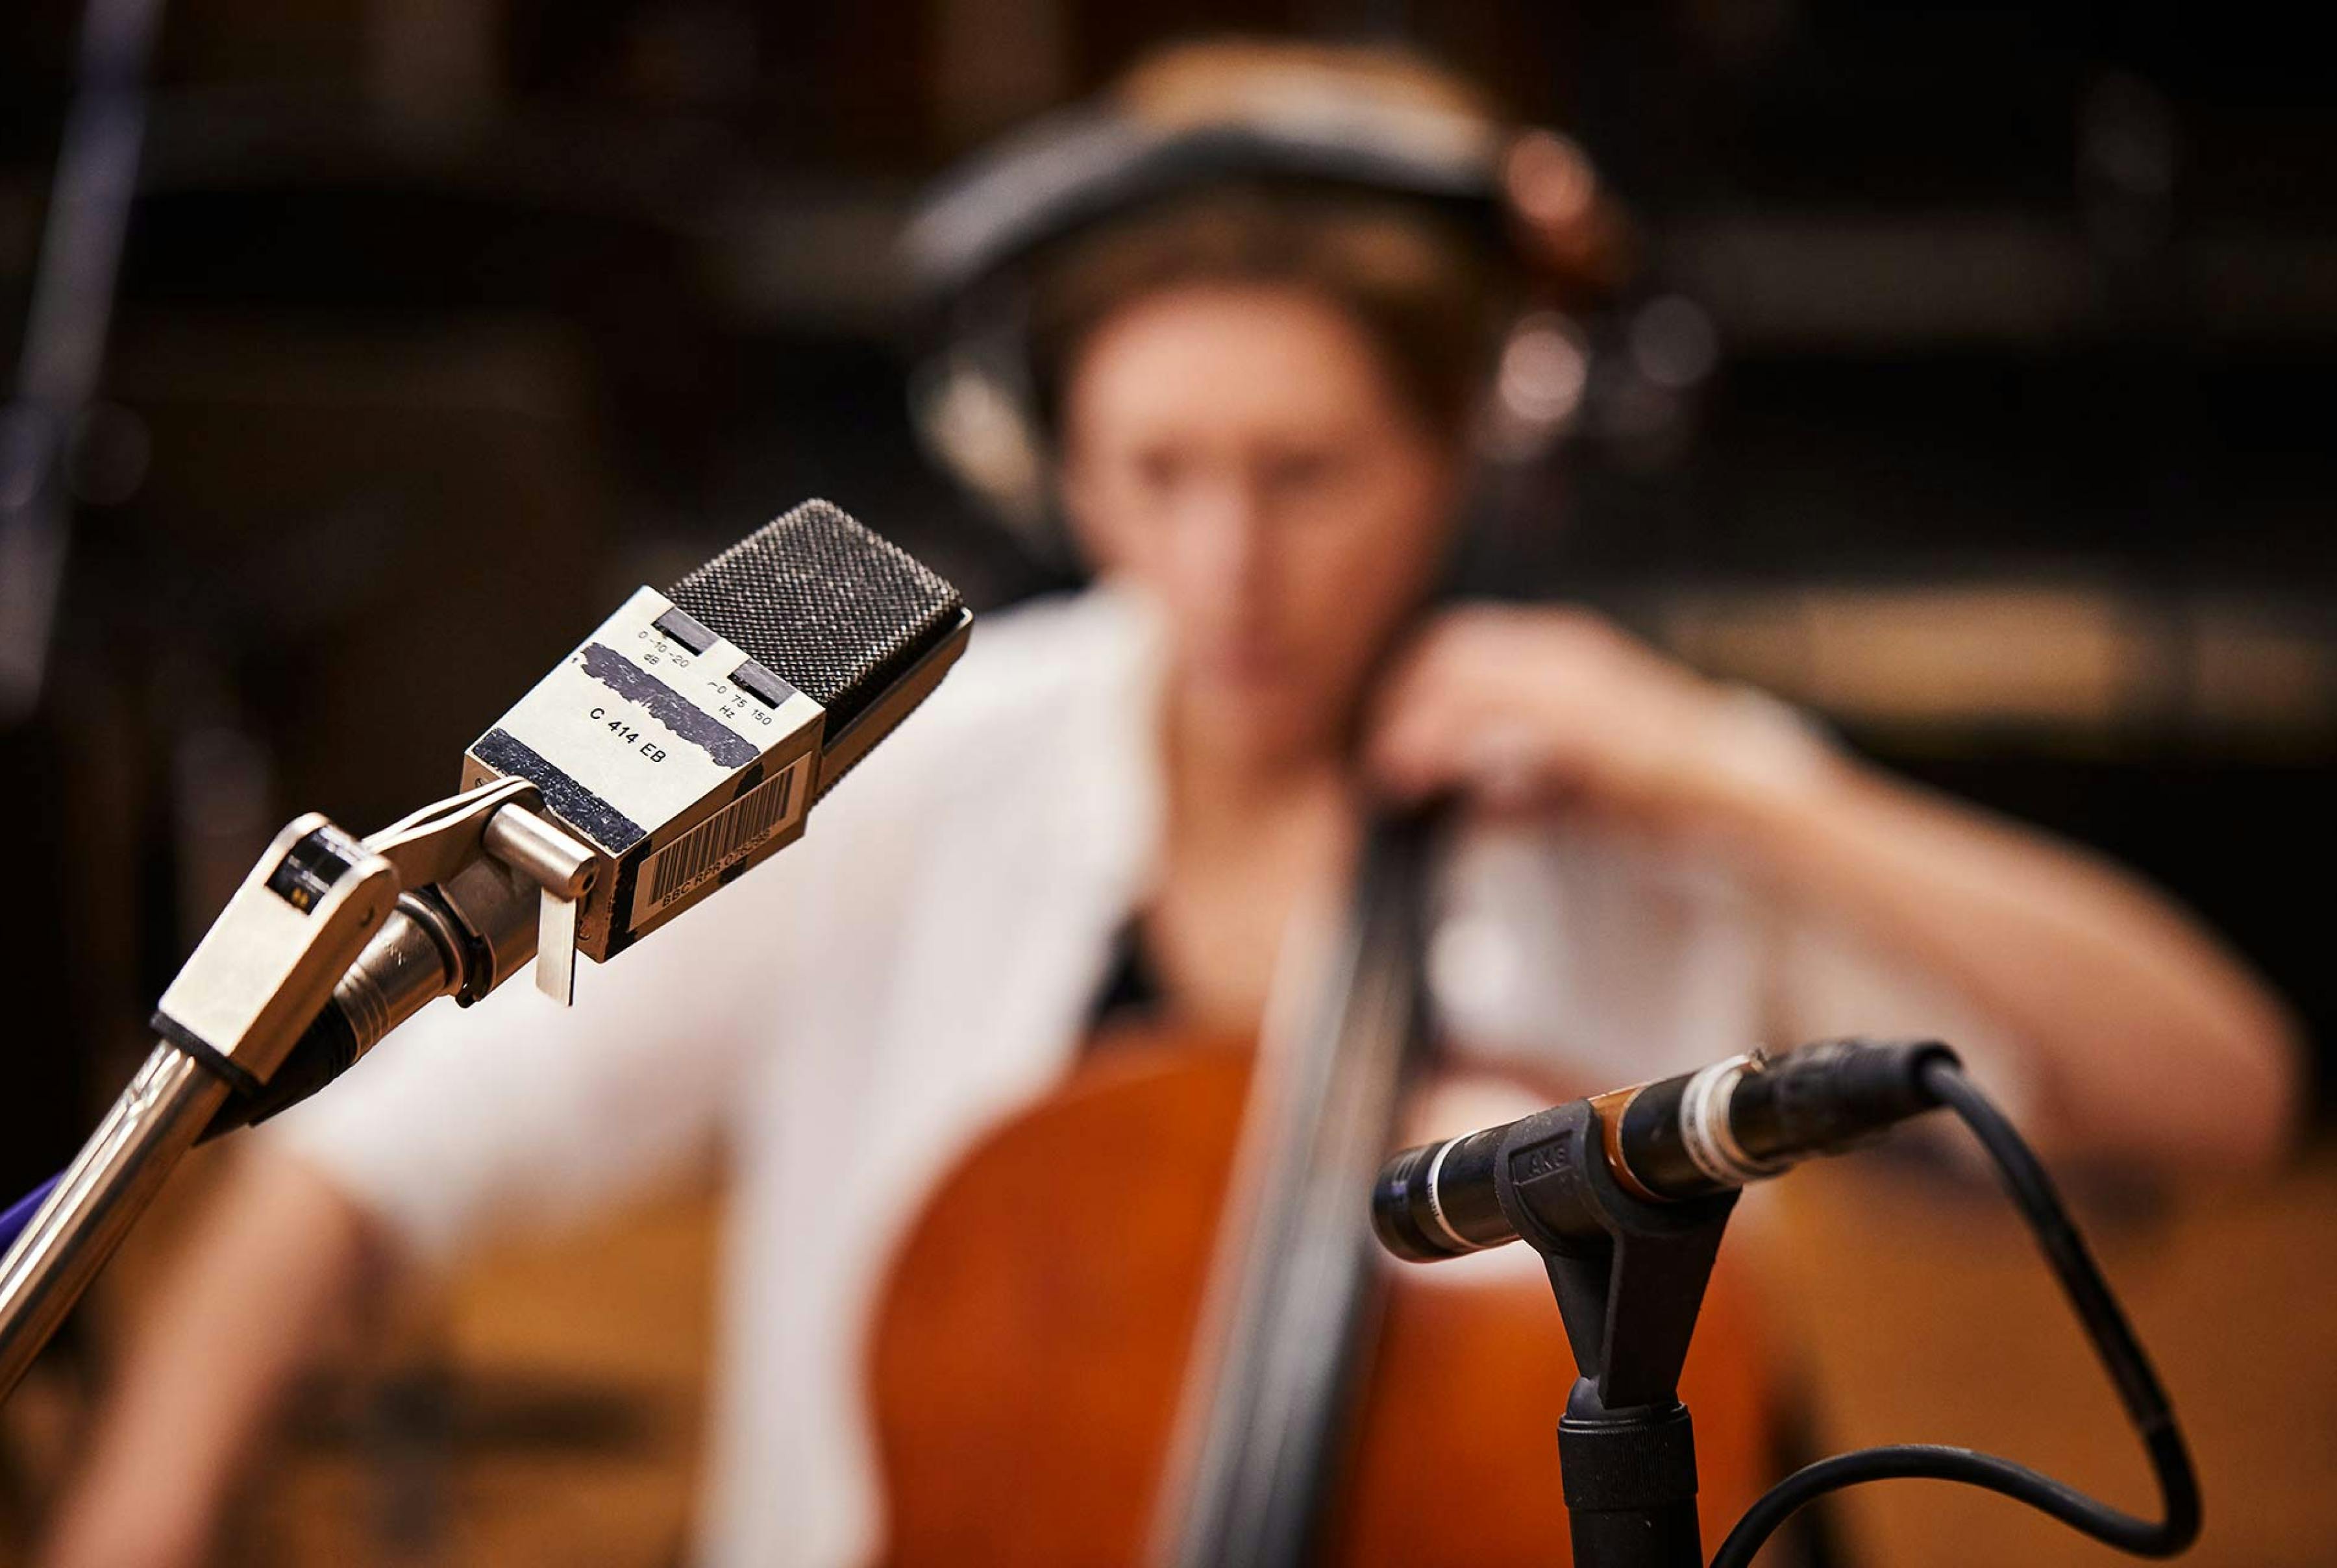 Microphone recording out of focus cellist